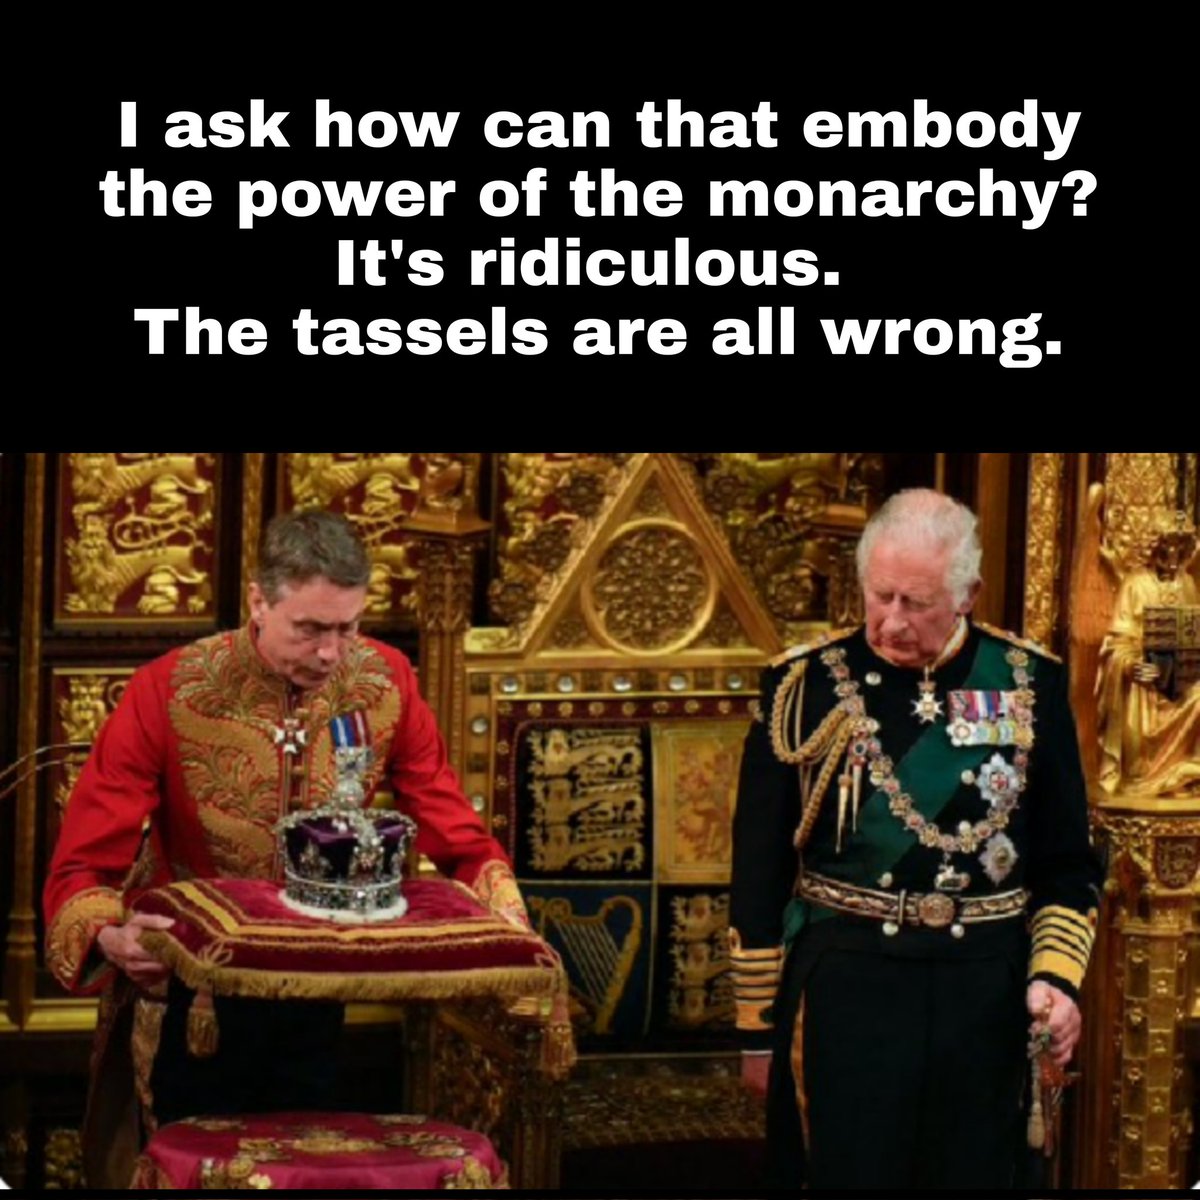 #AbolishTheMonarchy #JohnsonOut106 
Next year let's get a nurse to open parliament, or a bus driver. Someone useful.